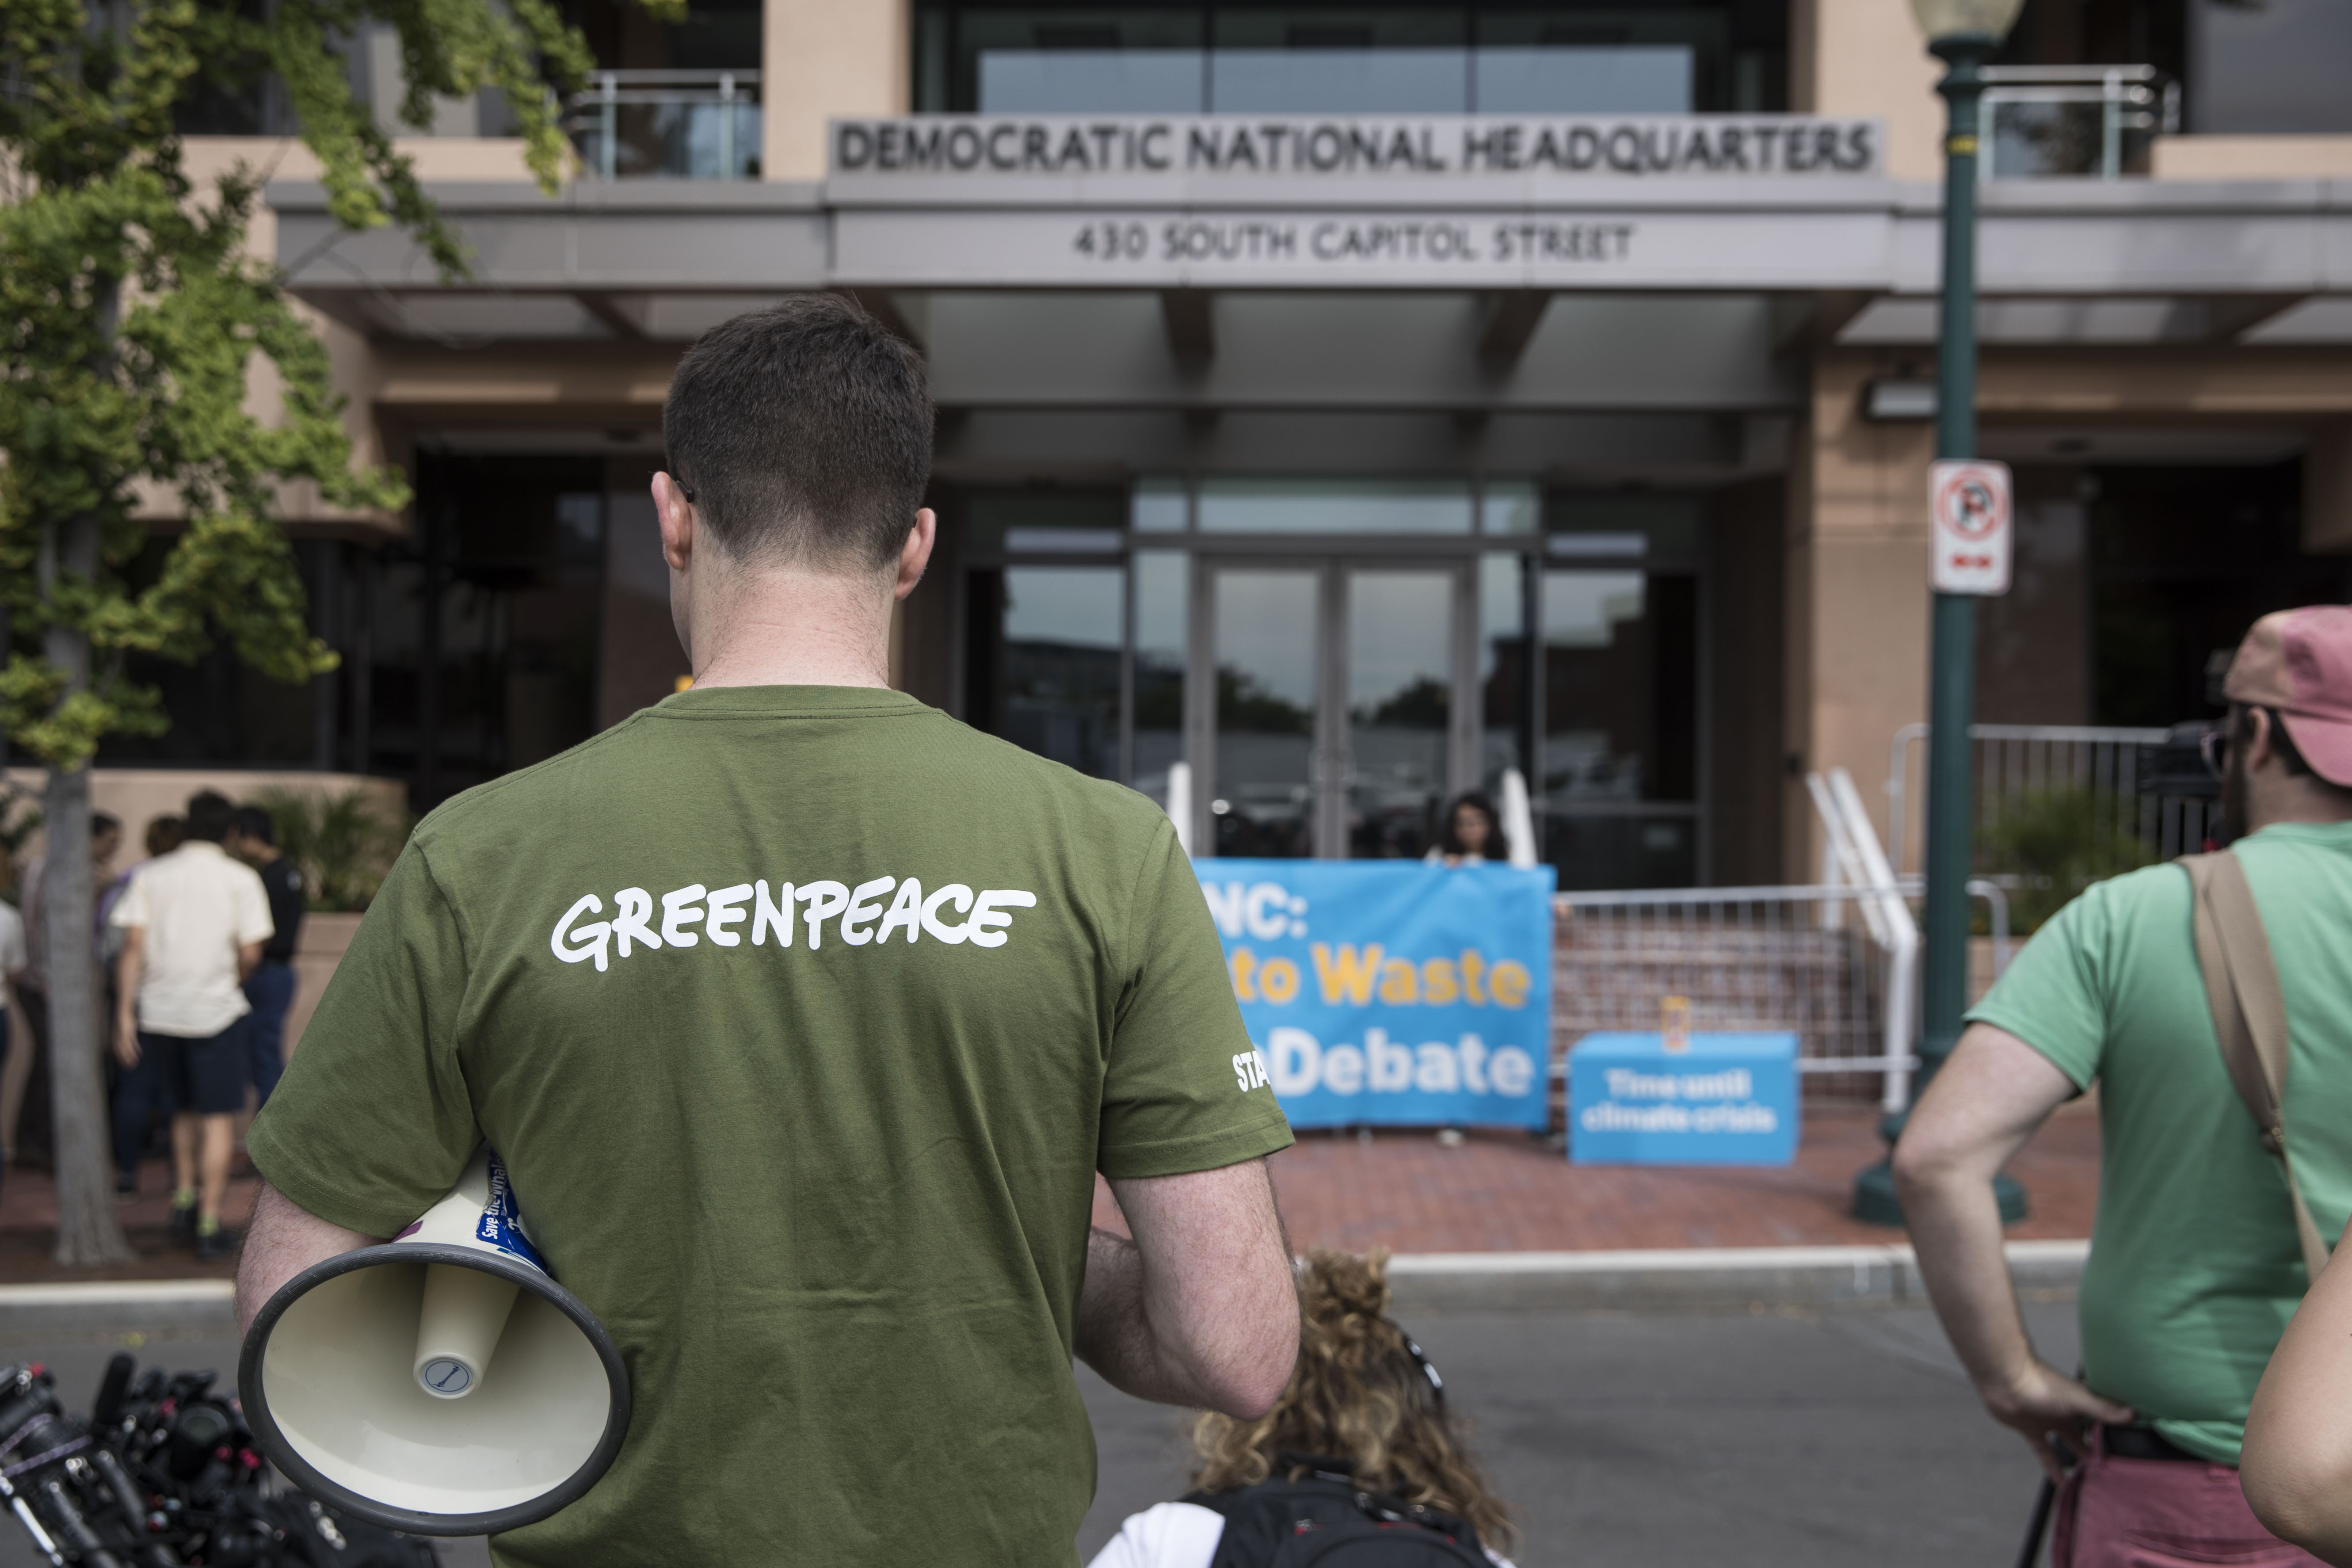 WASHINGTON, DC - JUNE 12: Jack Shapiro stands in front of the Democratic National Committee headquarters, during a Greenpeace rally to call for a presidential campaign climate debate on June 12, 2019 in Washington, DC. DNC chairman Tom Perez rejected a request from Democratic presidential candidate Washington Gov. Jay Inslee to host a 2020 presidential debate focused solely on climate change. (Photo by Sarah Silbiger/Getty Images)